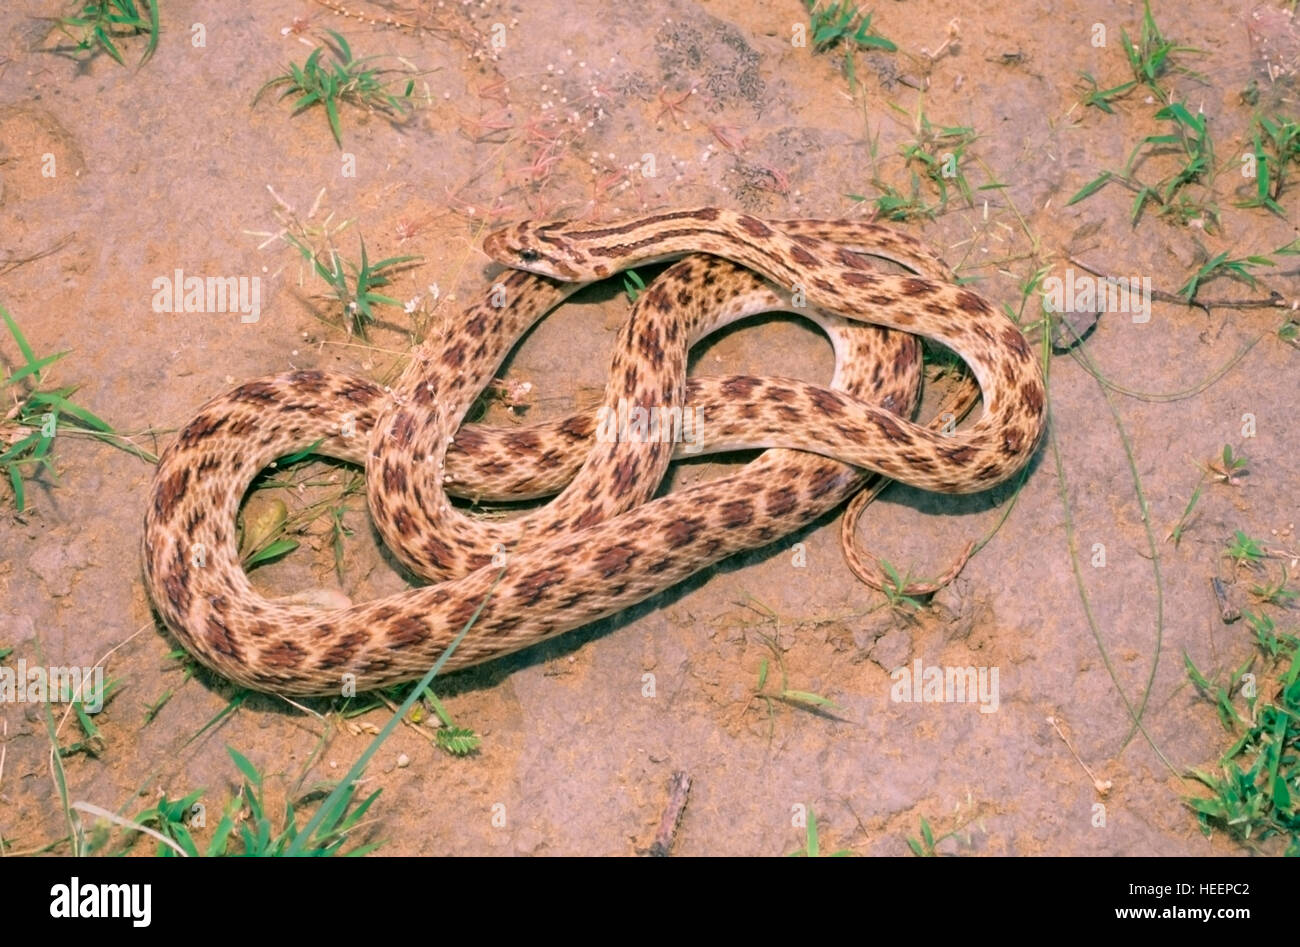 Red Spotted Royal Snake, Spalerosophis aranarius, One of the rare snake of India from Rajasthan. Stock Photo